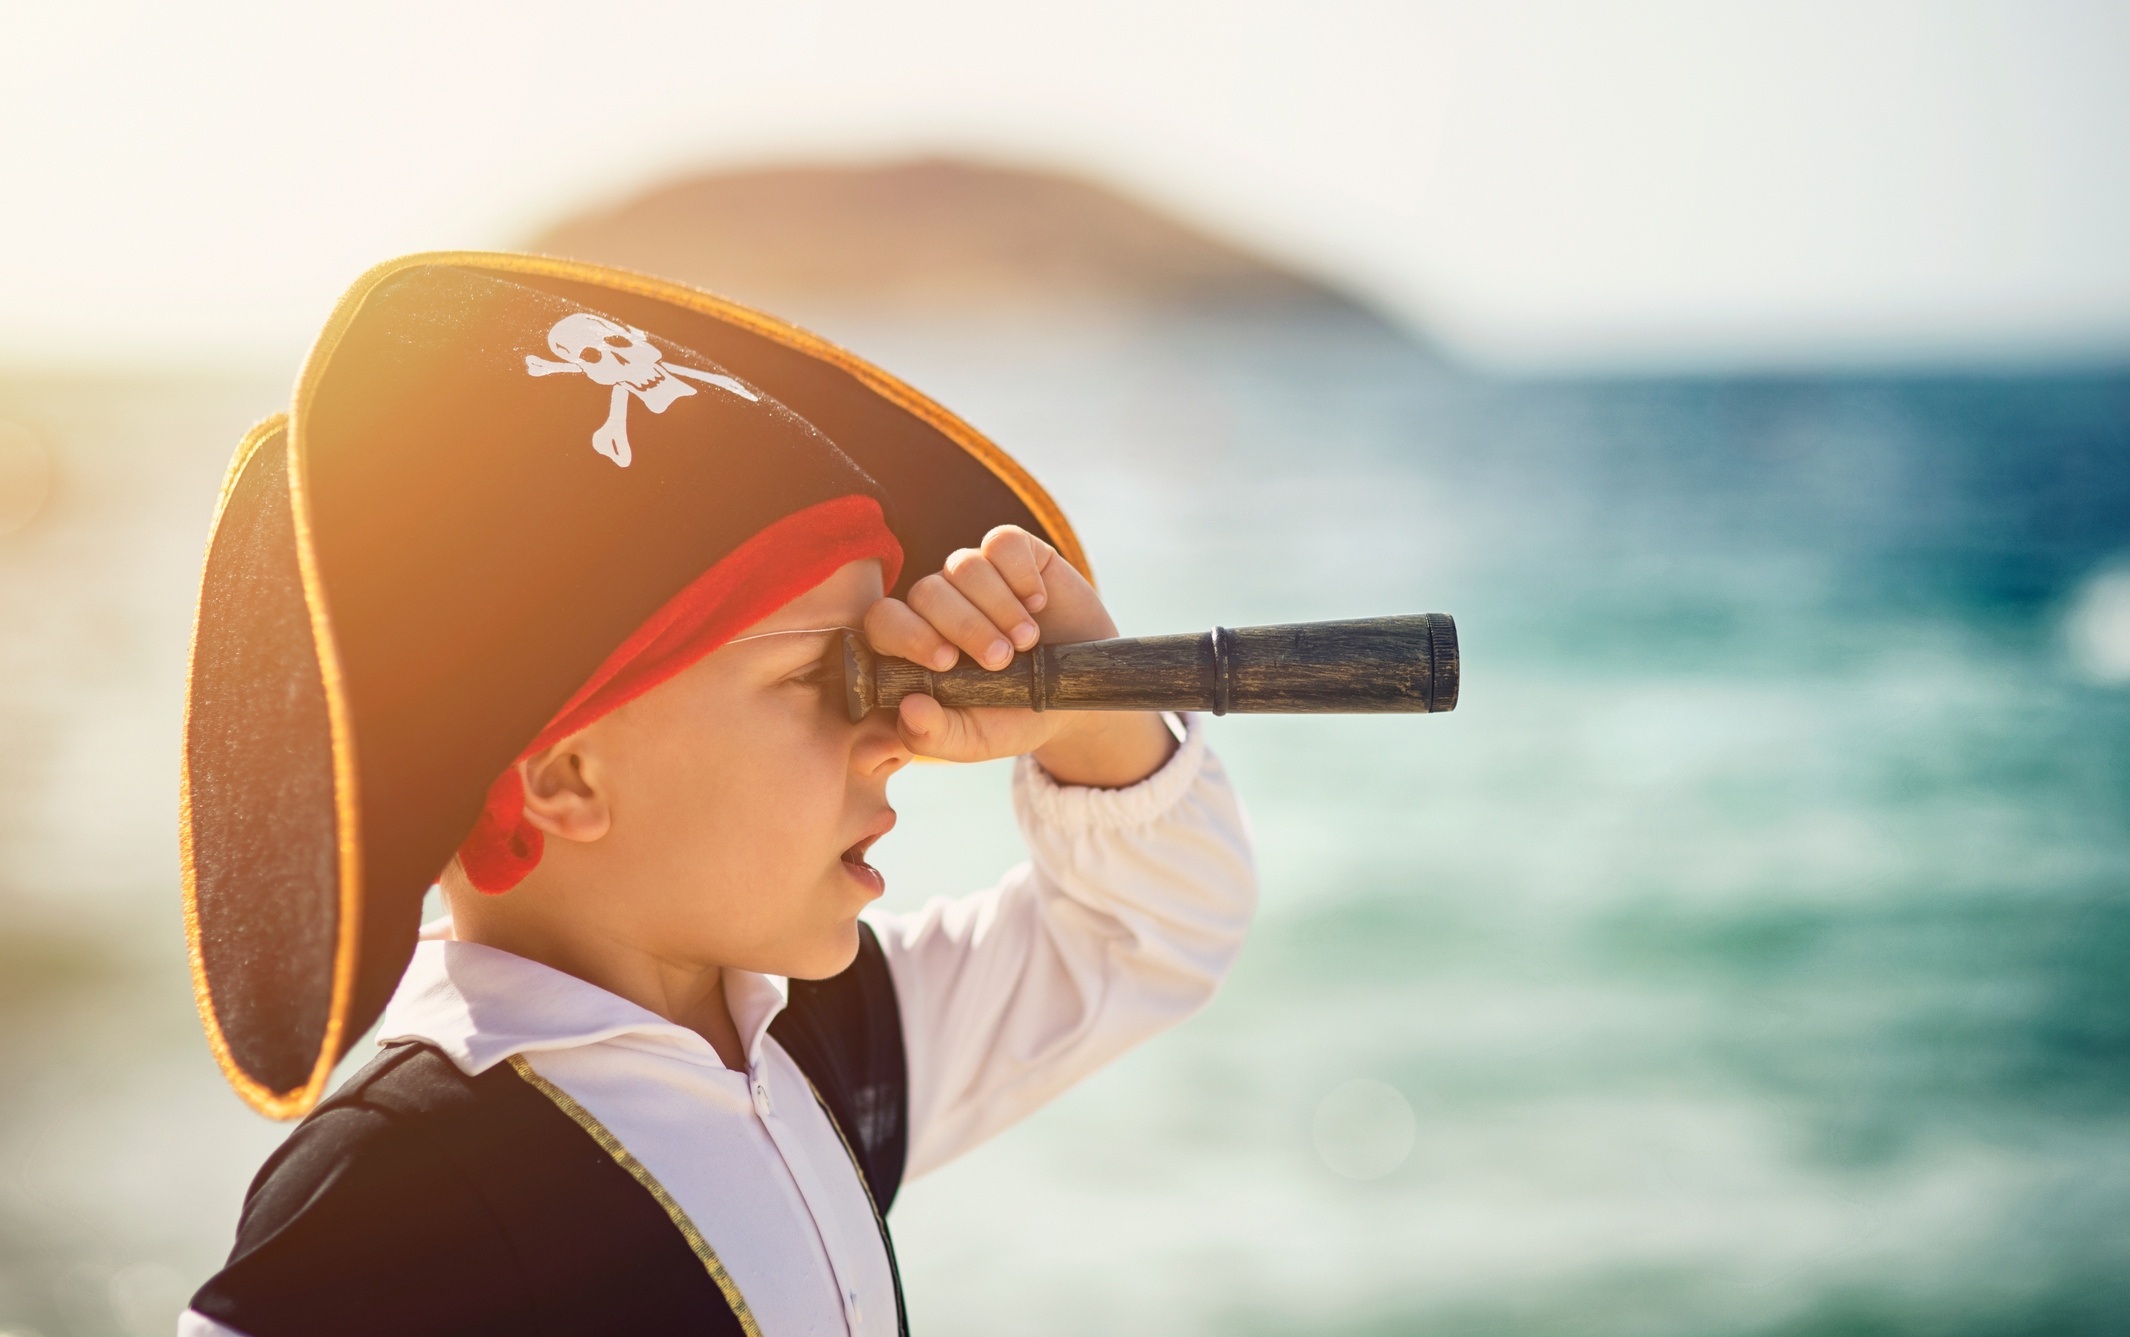 Little pirate looking with spyglass